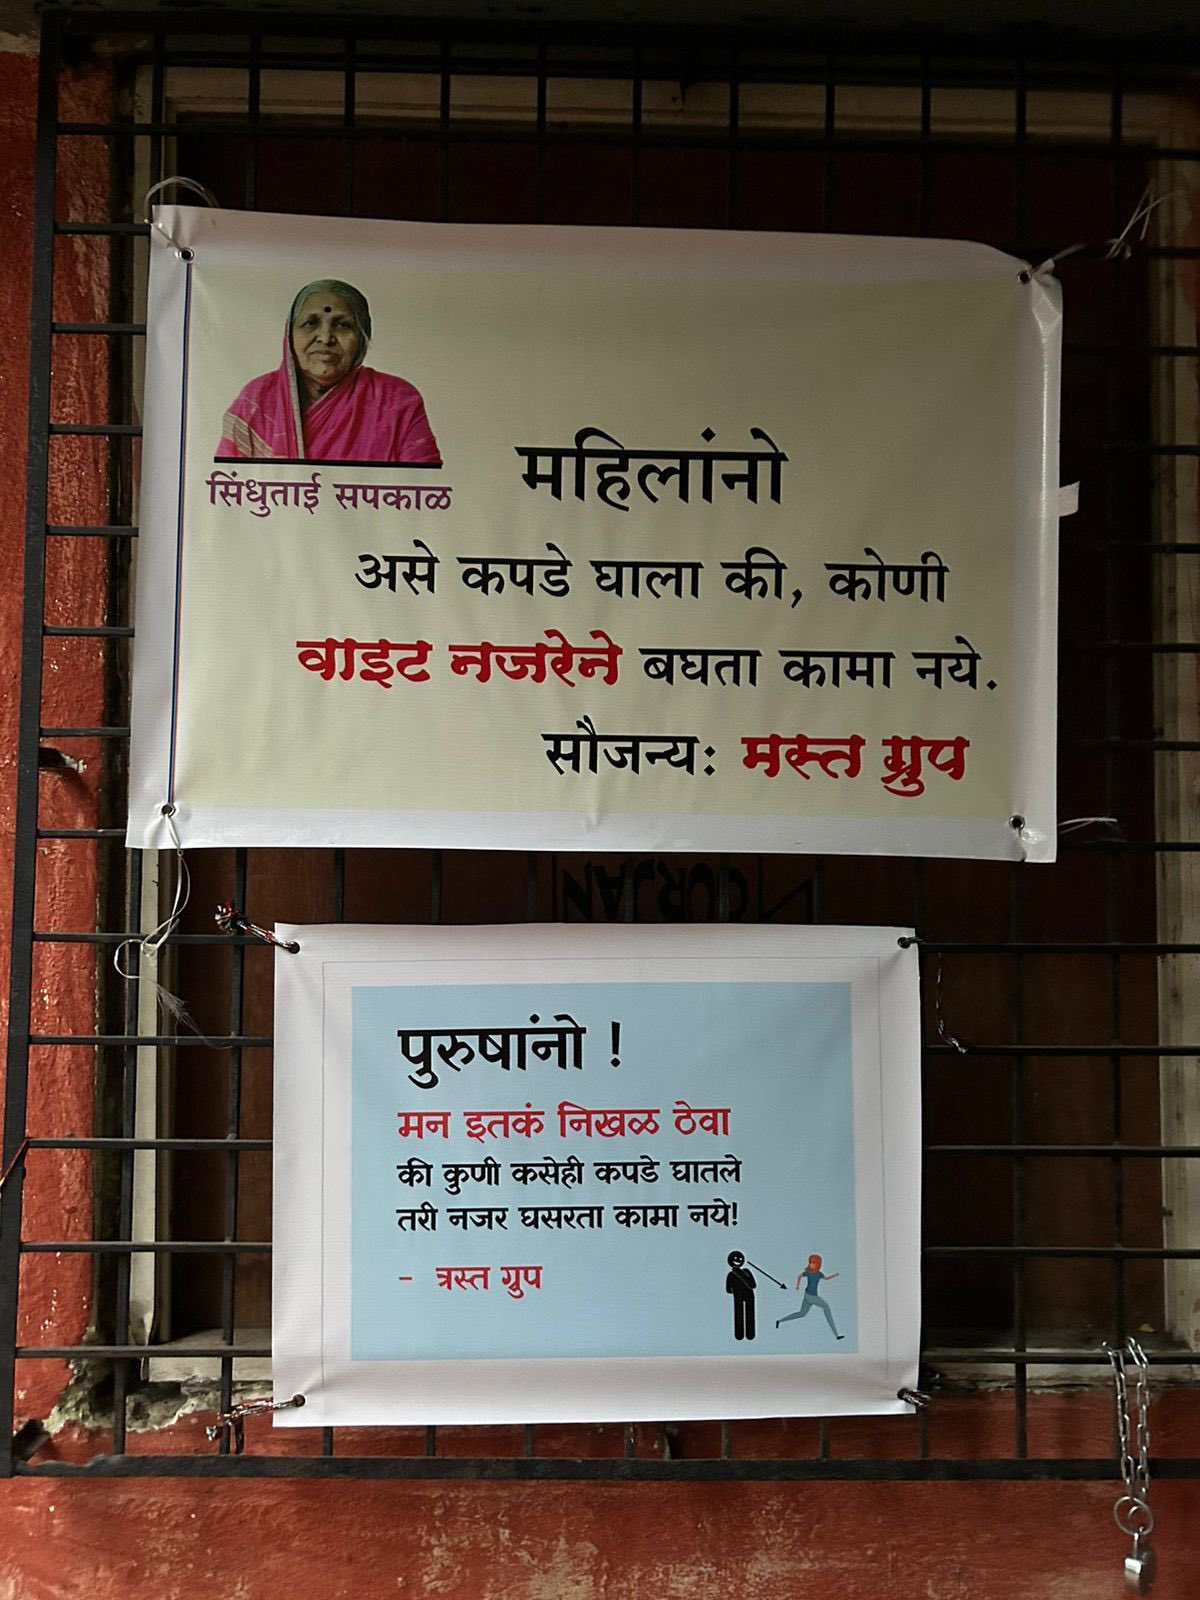 A rude comment on a poster in Pune advising women to dress modestly reads, “Your mind….”-thumnail